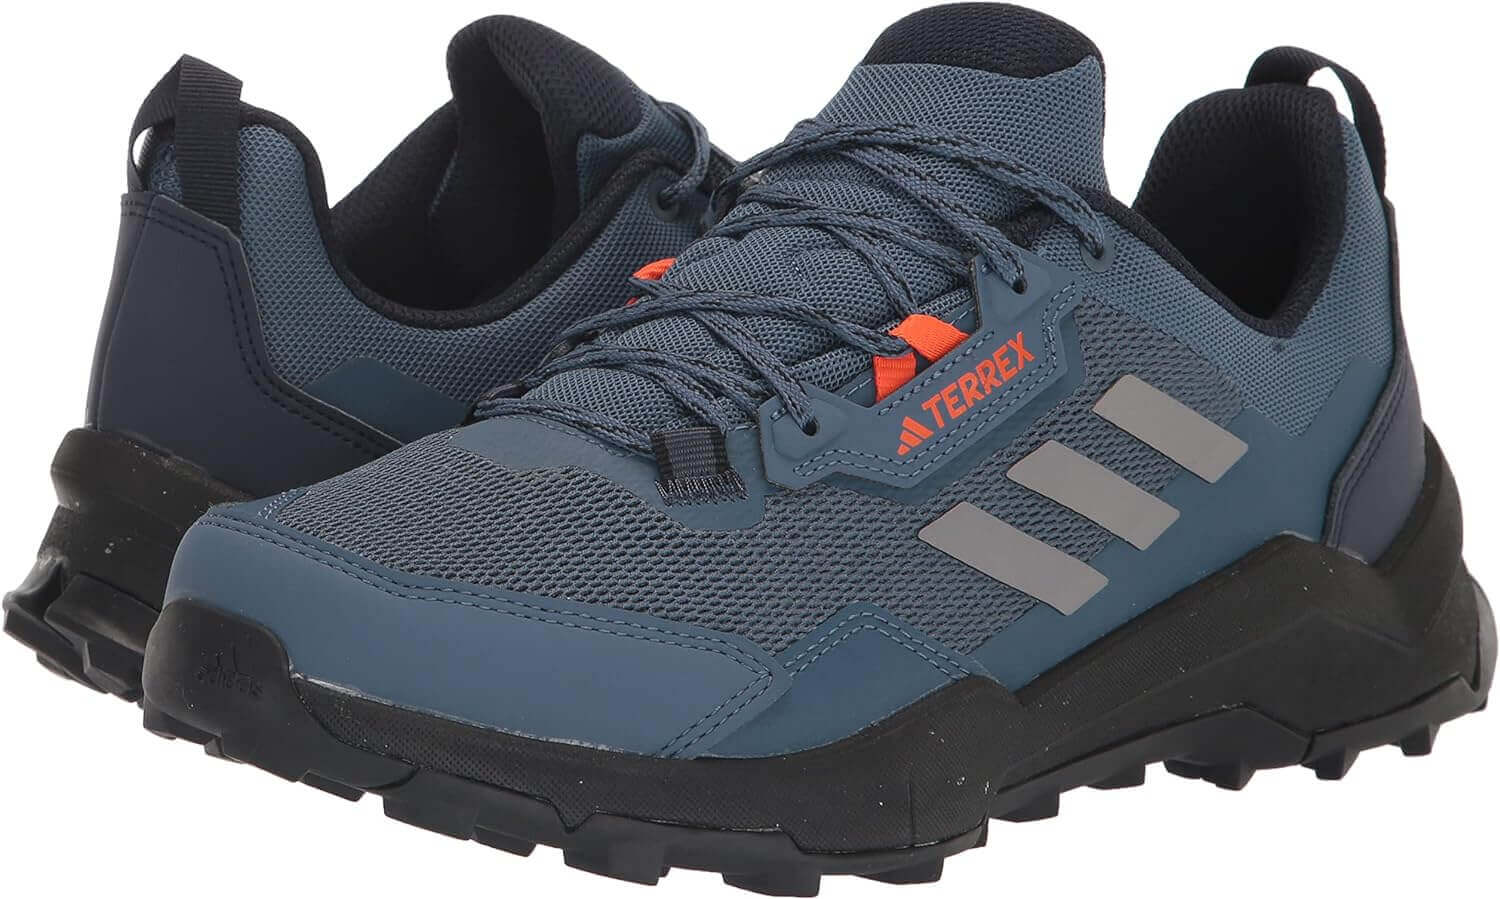 Shop The Latest >adidas Men's Terrex Ax4 Wonder Trekking Shoe > *Only $67.41*> From The Top Brand > *adidasl* > Shop Now and Get Free Shipping On Orders Over $45.00 >*Shop Earth Foot*